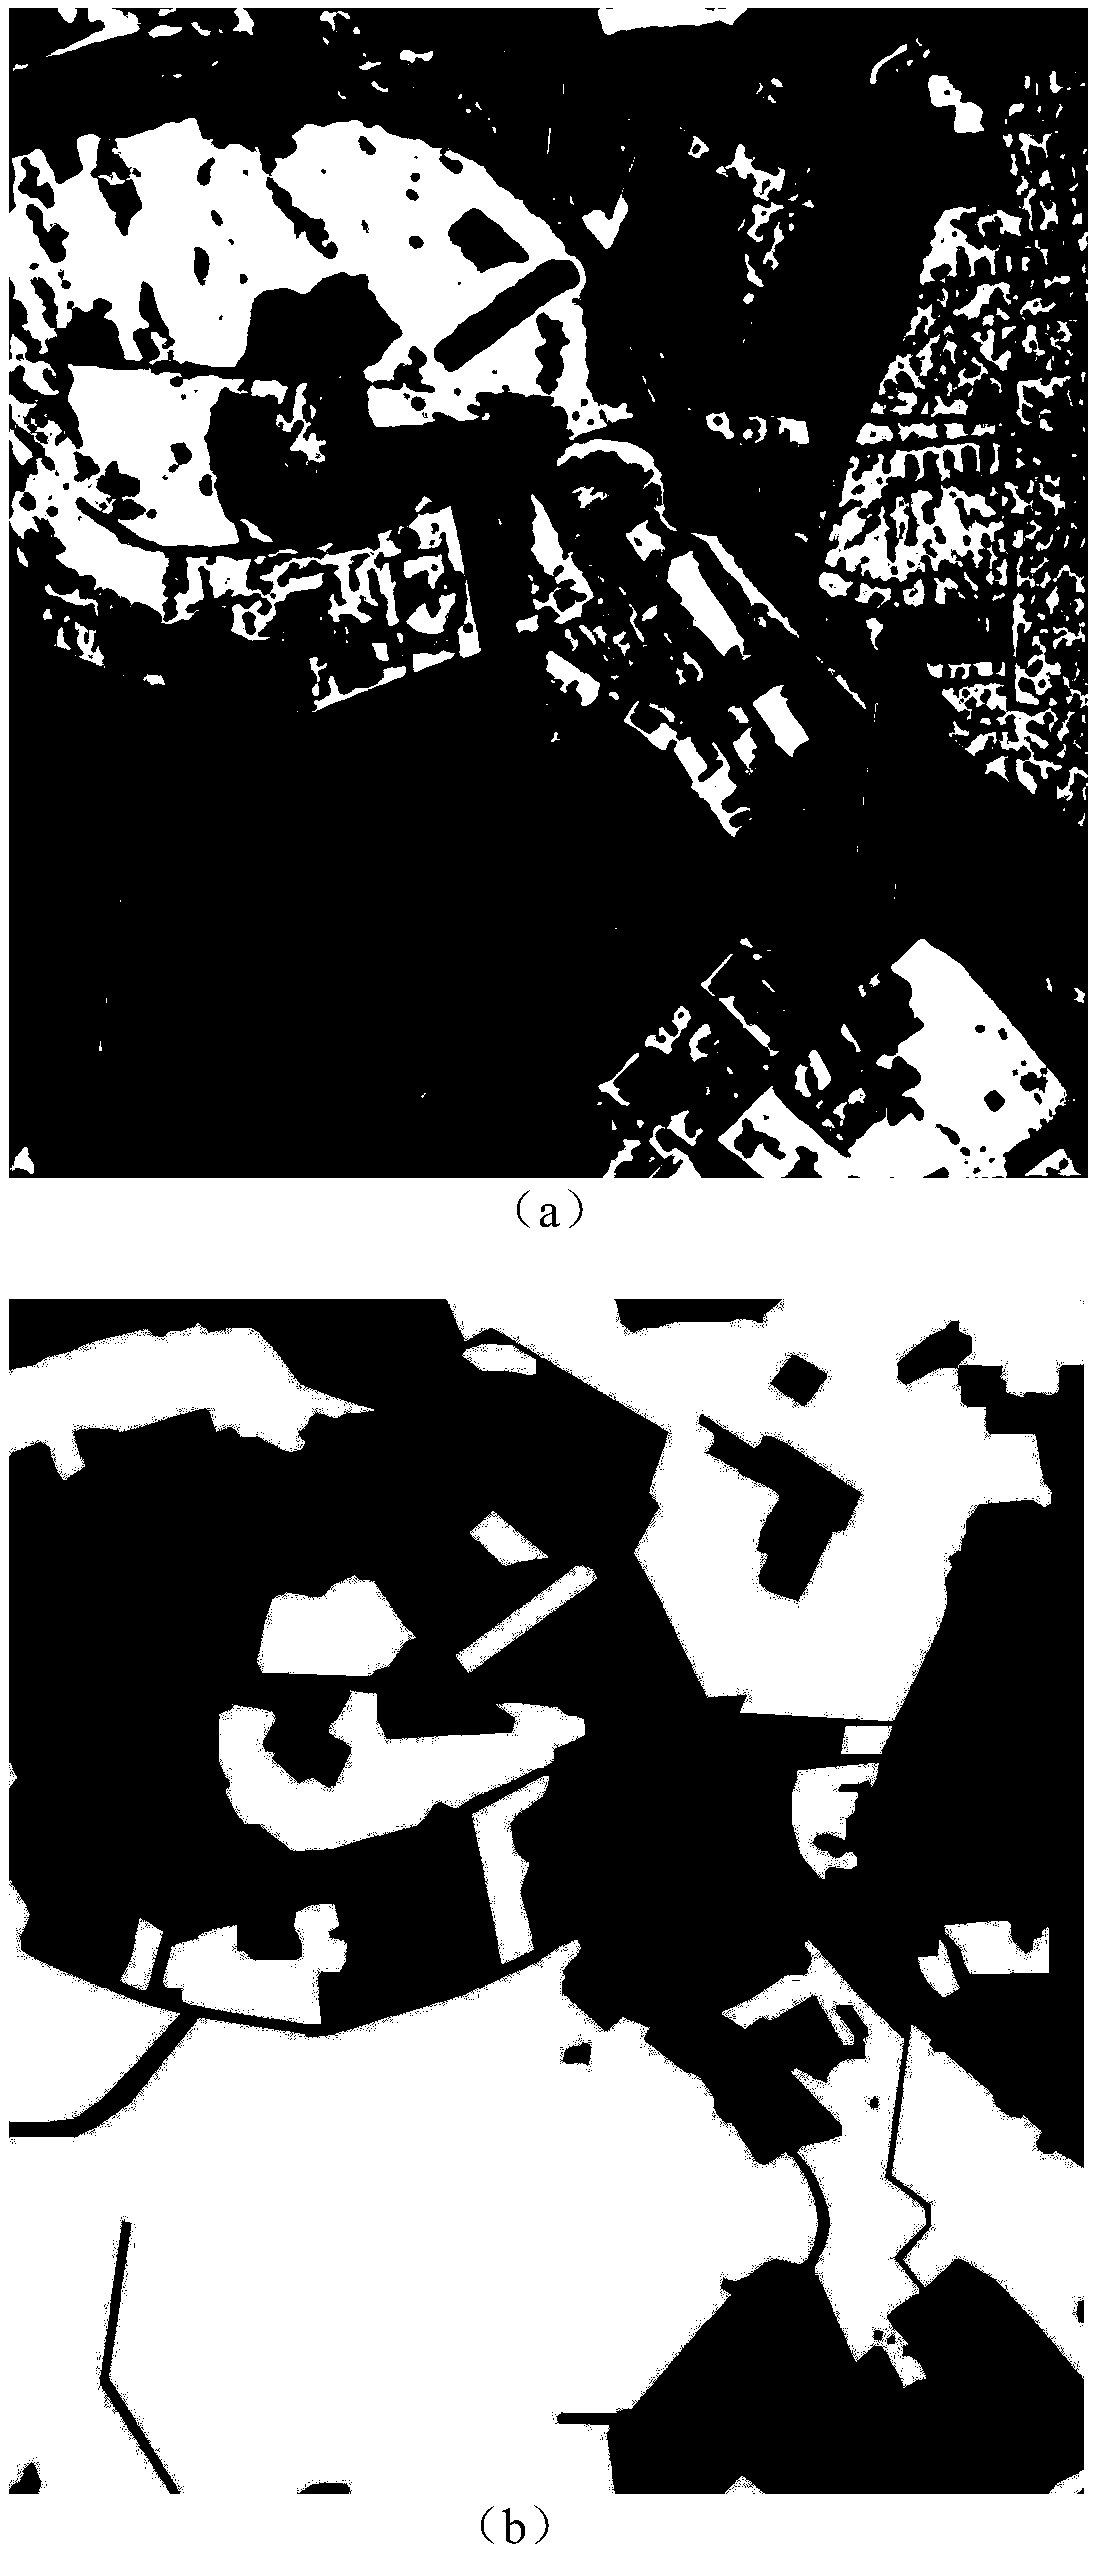 Polarized SAR Image Classification Method Based on Residual Learning and Conditional GAN